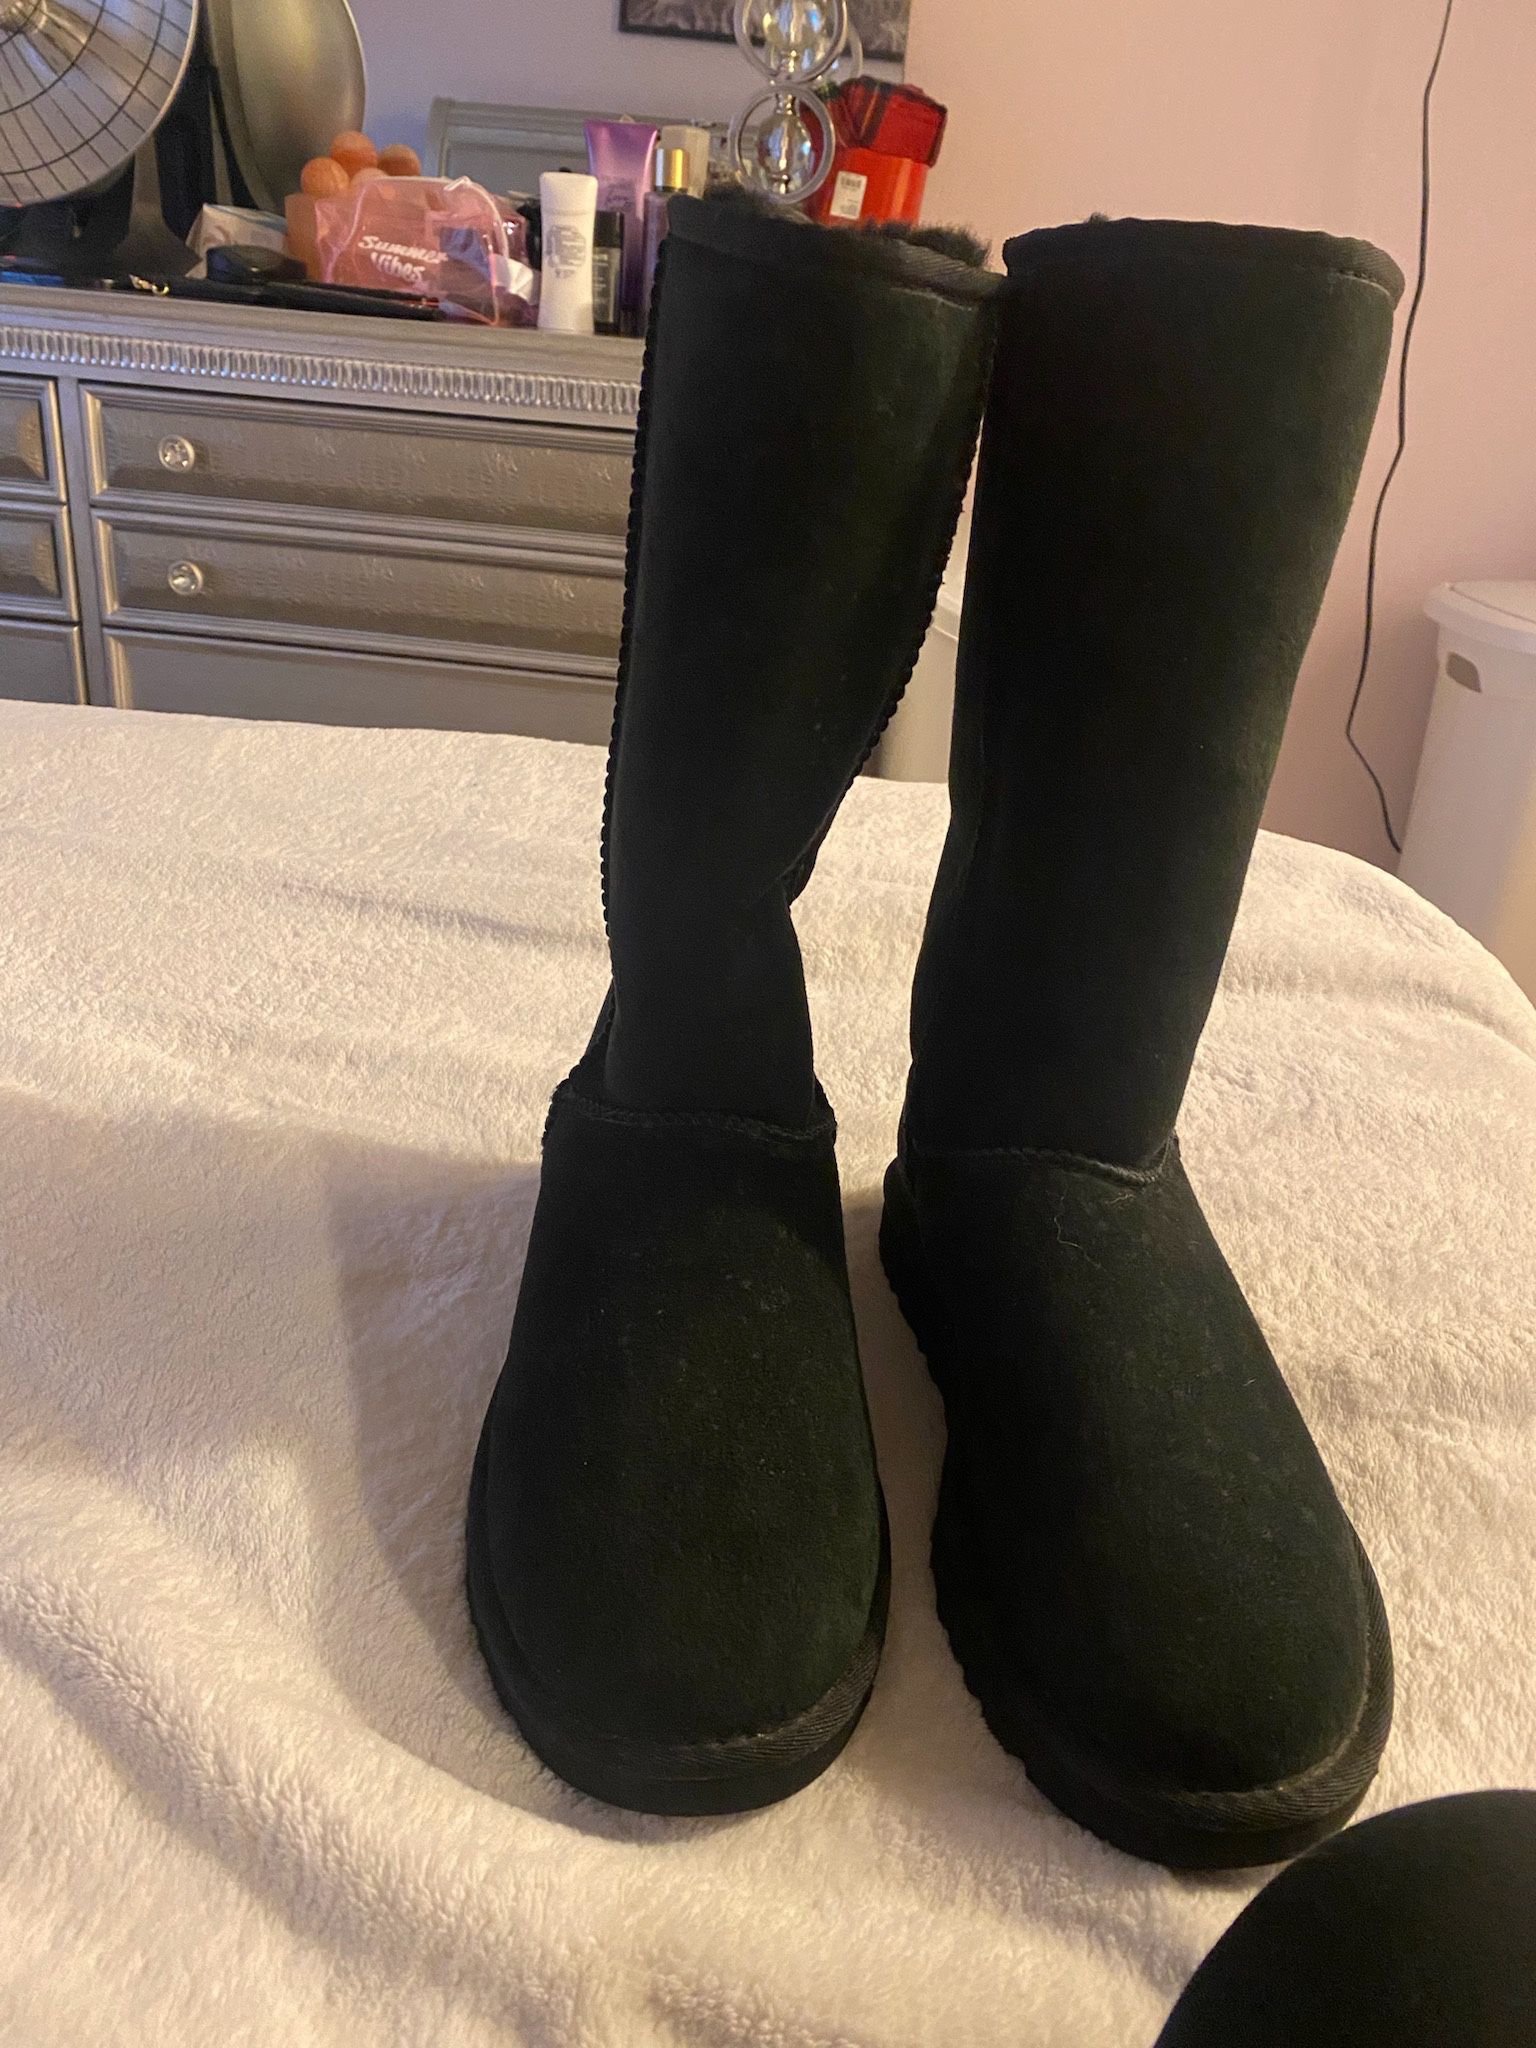 UGG Boots Size 7 (Tall Black With Out Box)